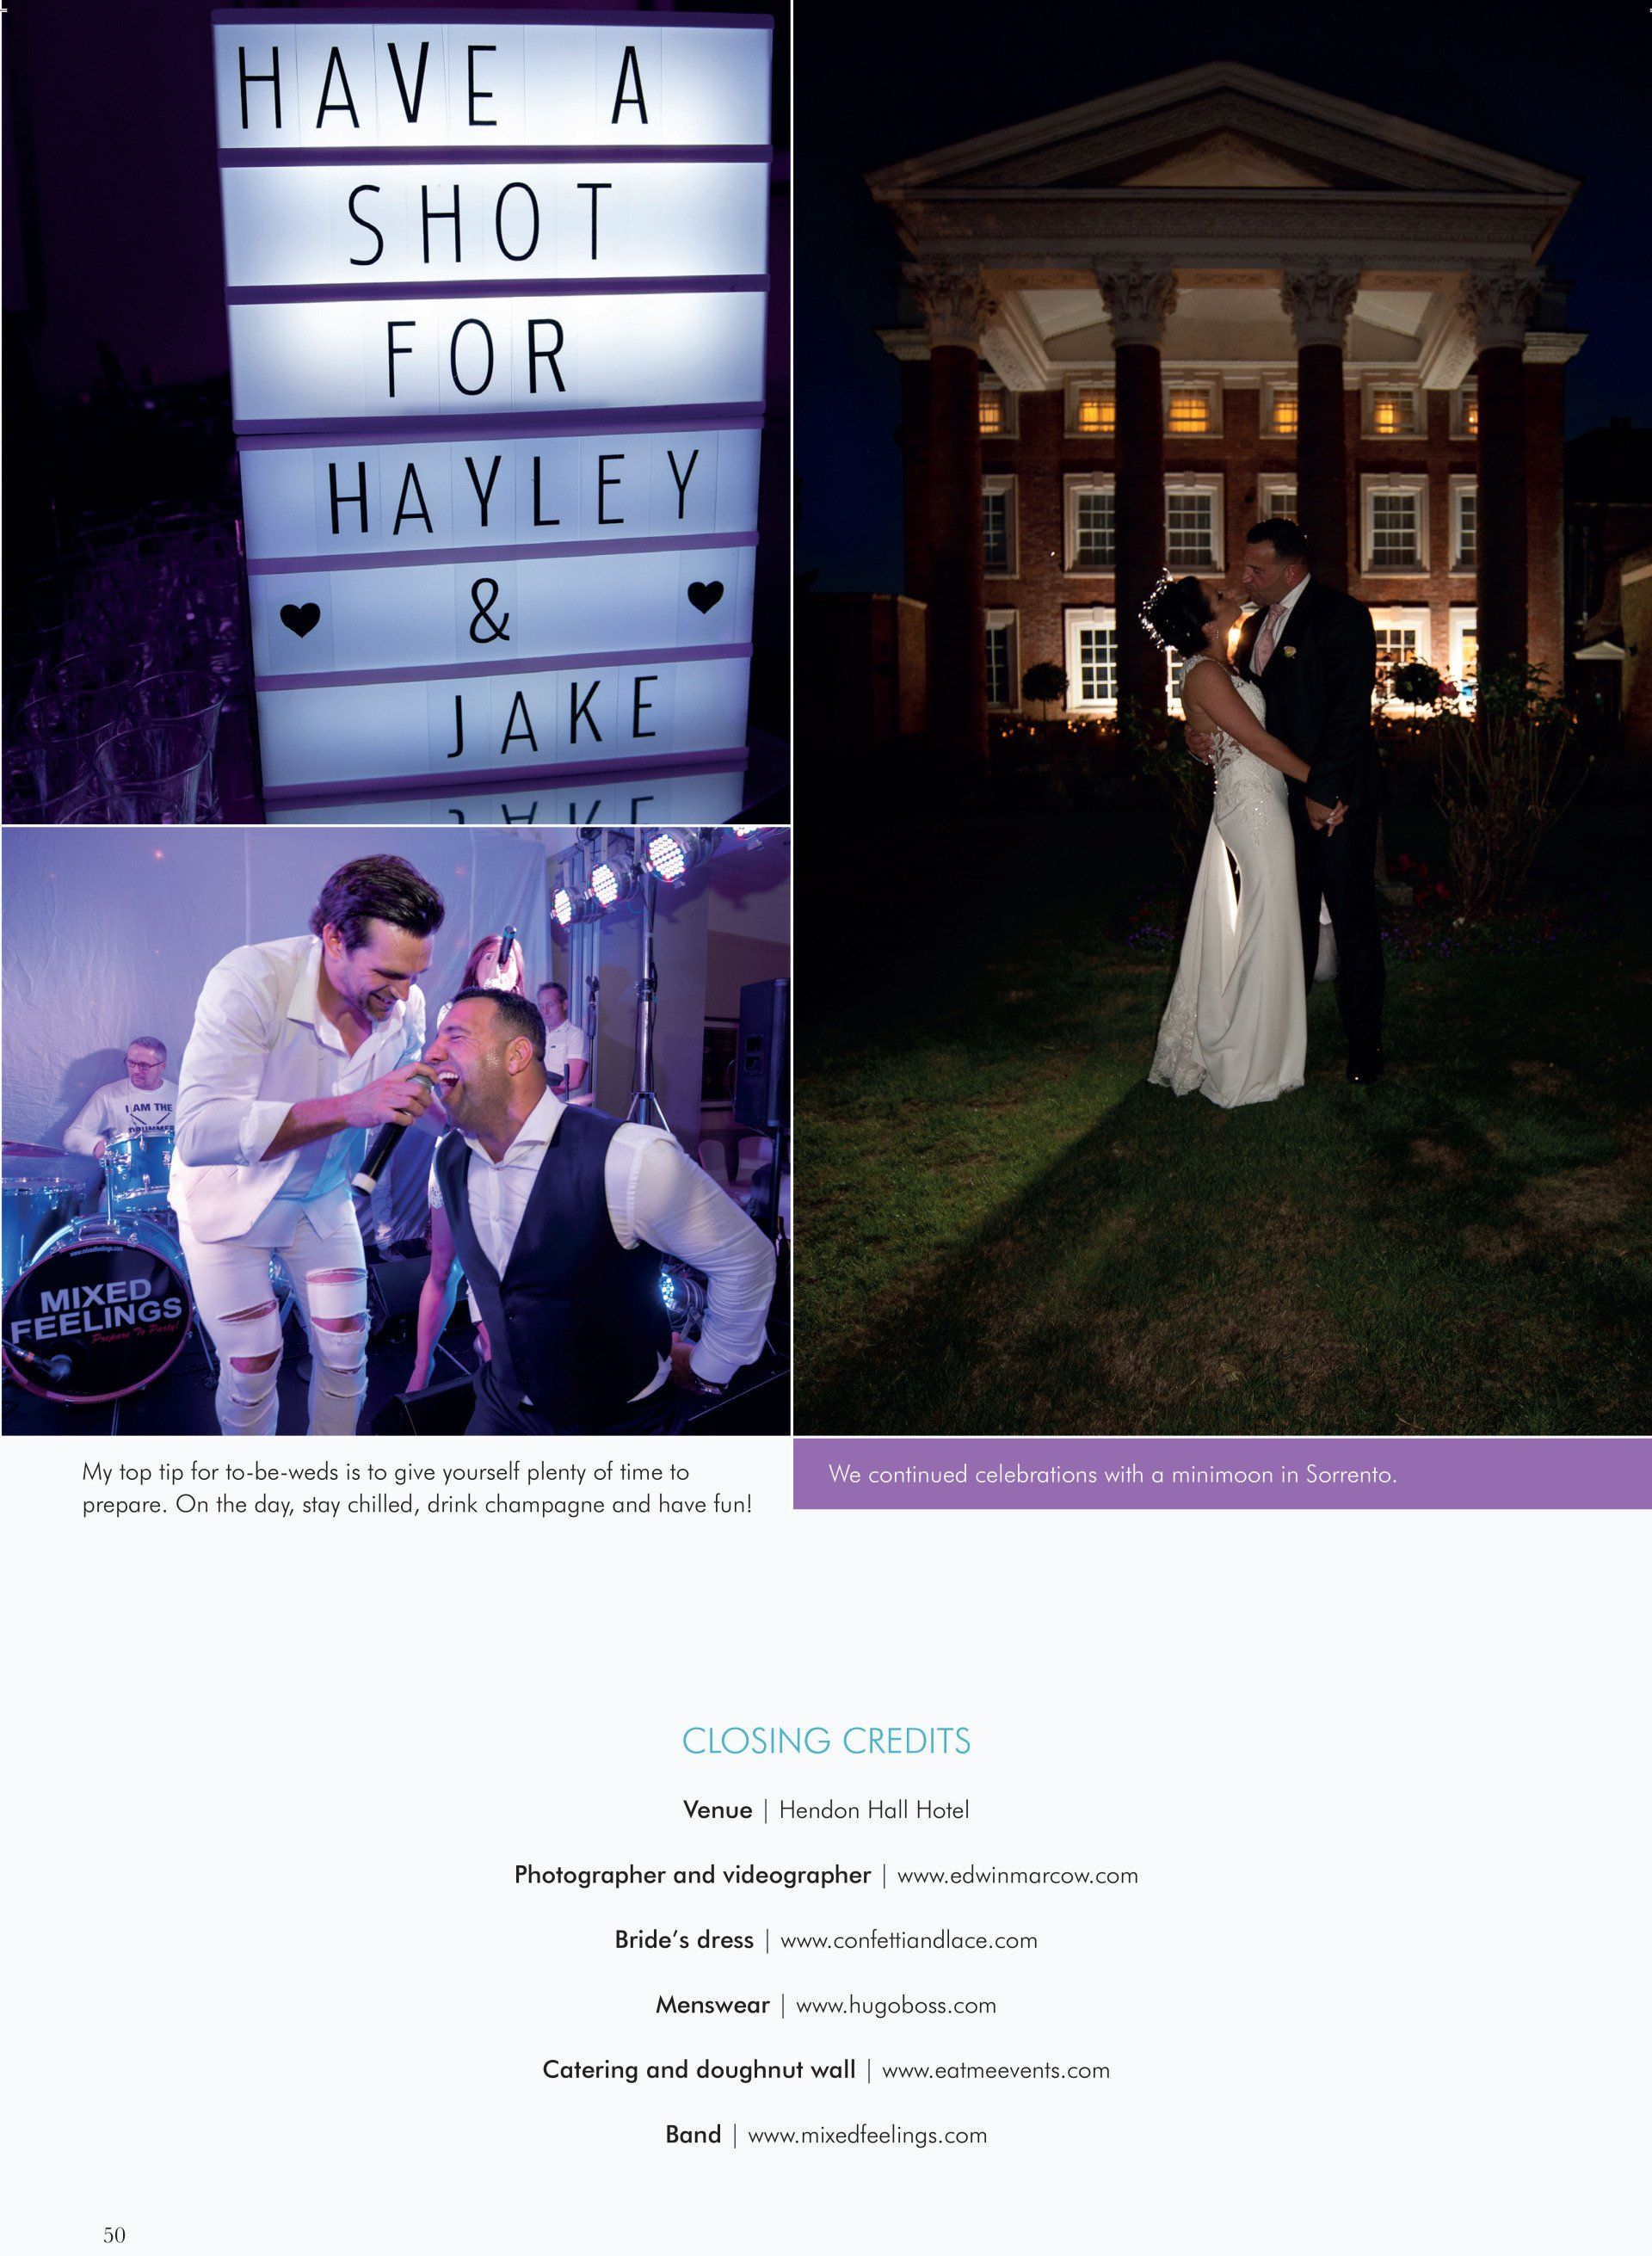 Images Of Have A Shot For Hayley & Jake,  Signature Iconic Bride & Groom Portrait